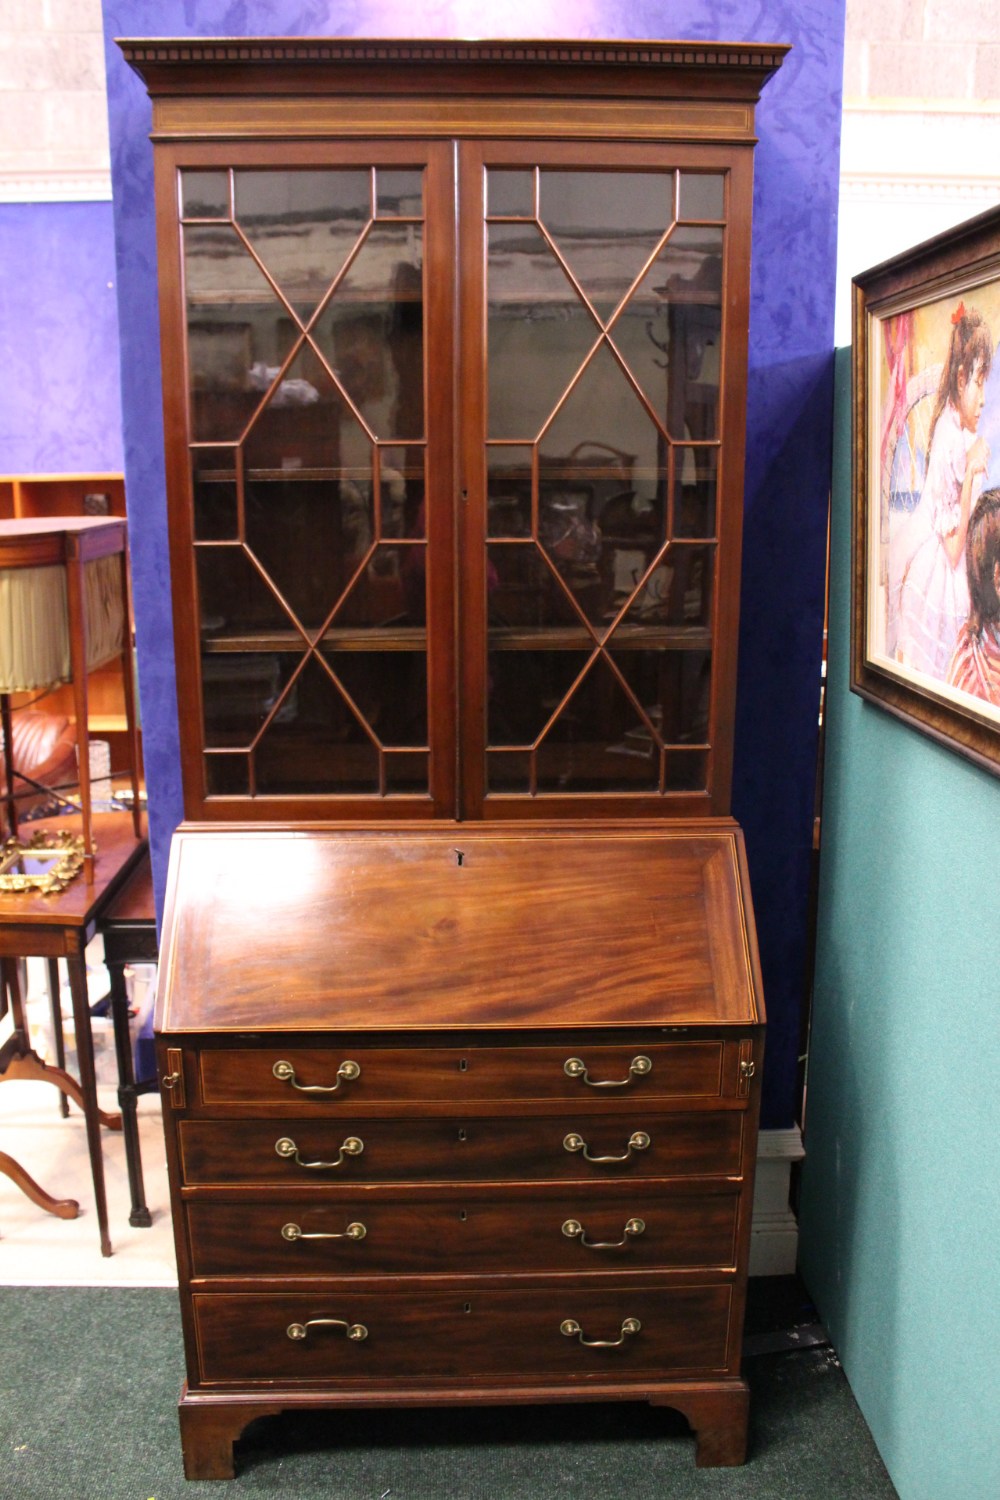 A VERY FINE EDWARDIAN MAHOGANY & INLAID BUREAU BOOKCASE, with astragal glazed two door cabinet, over